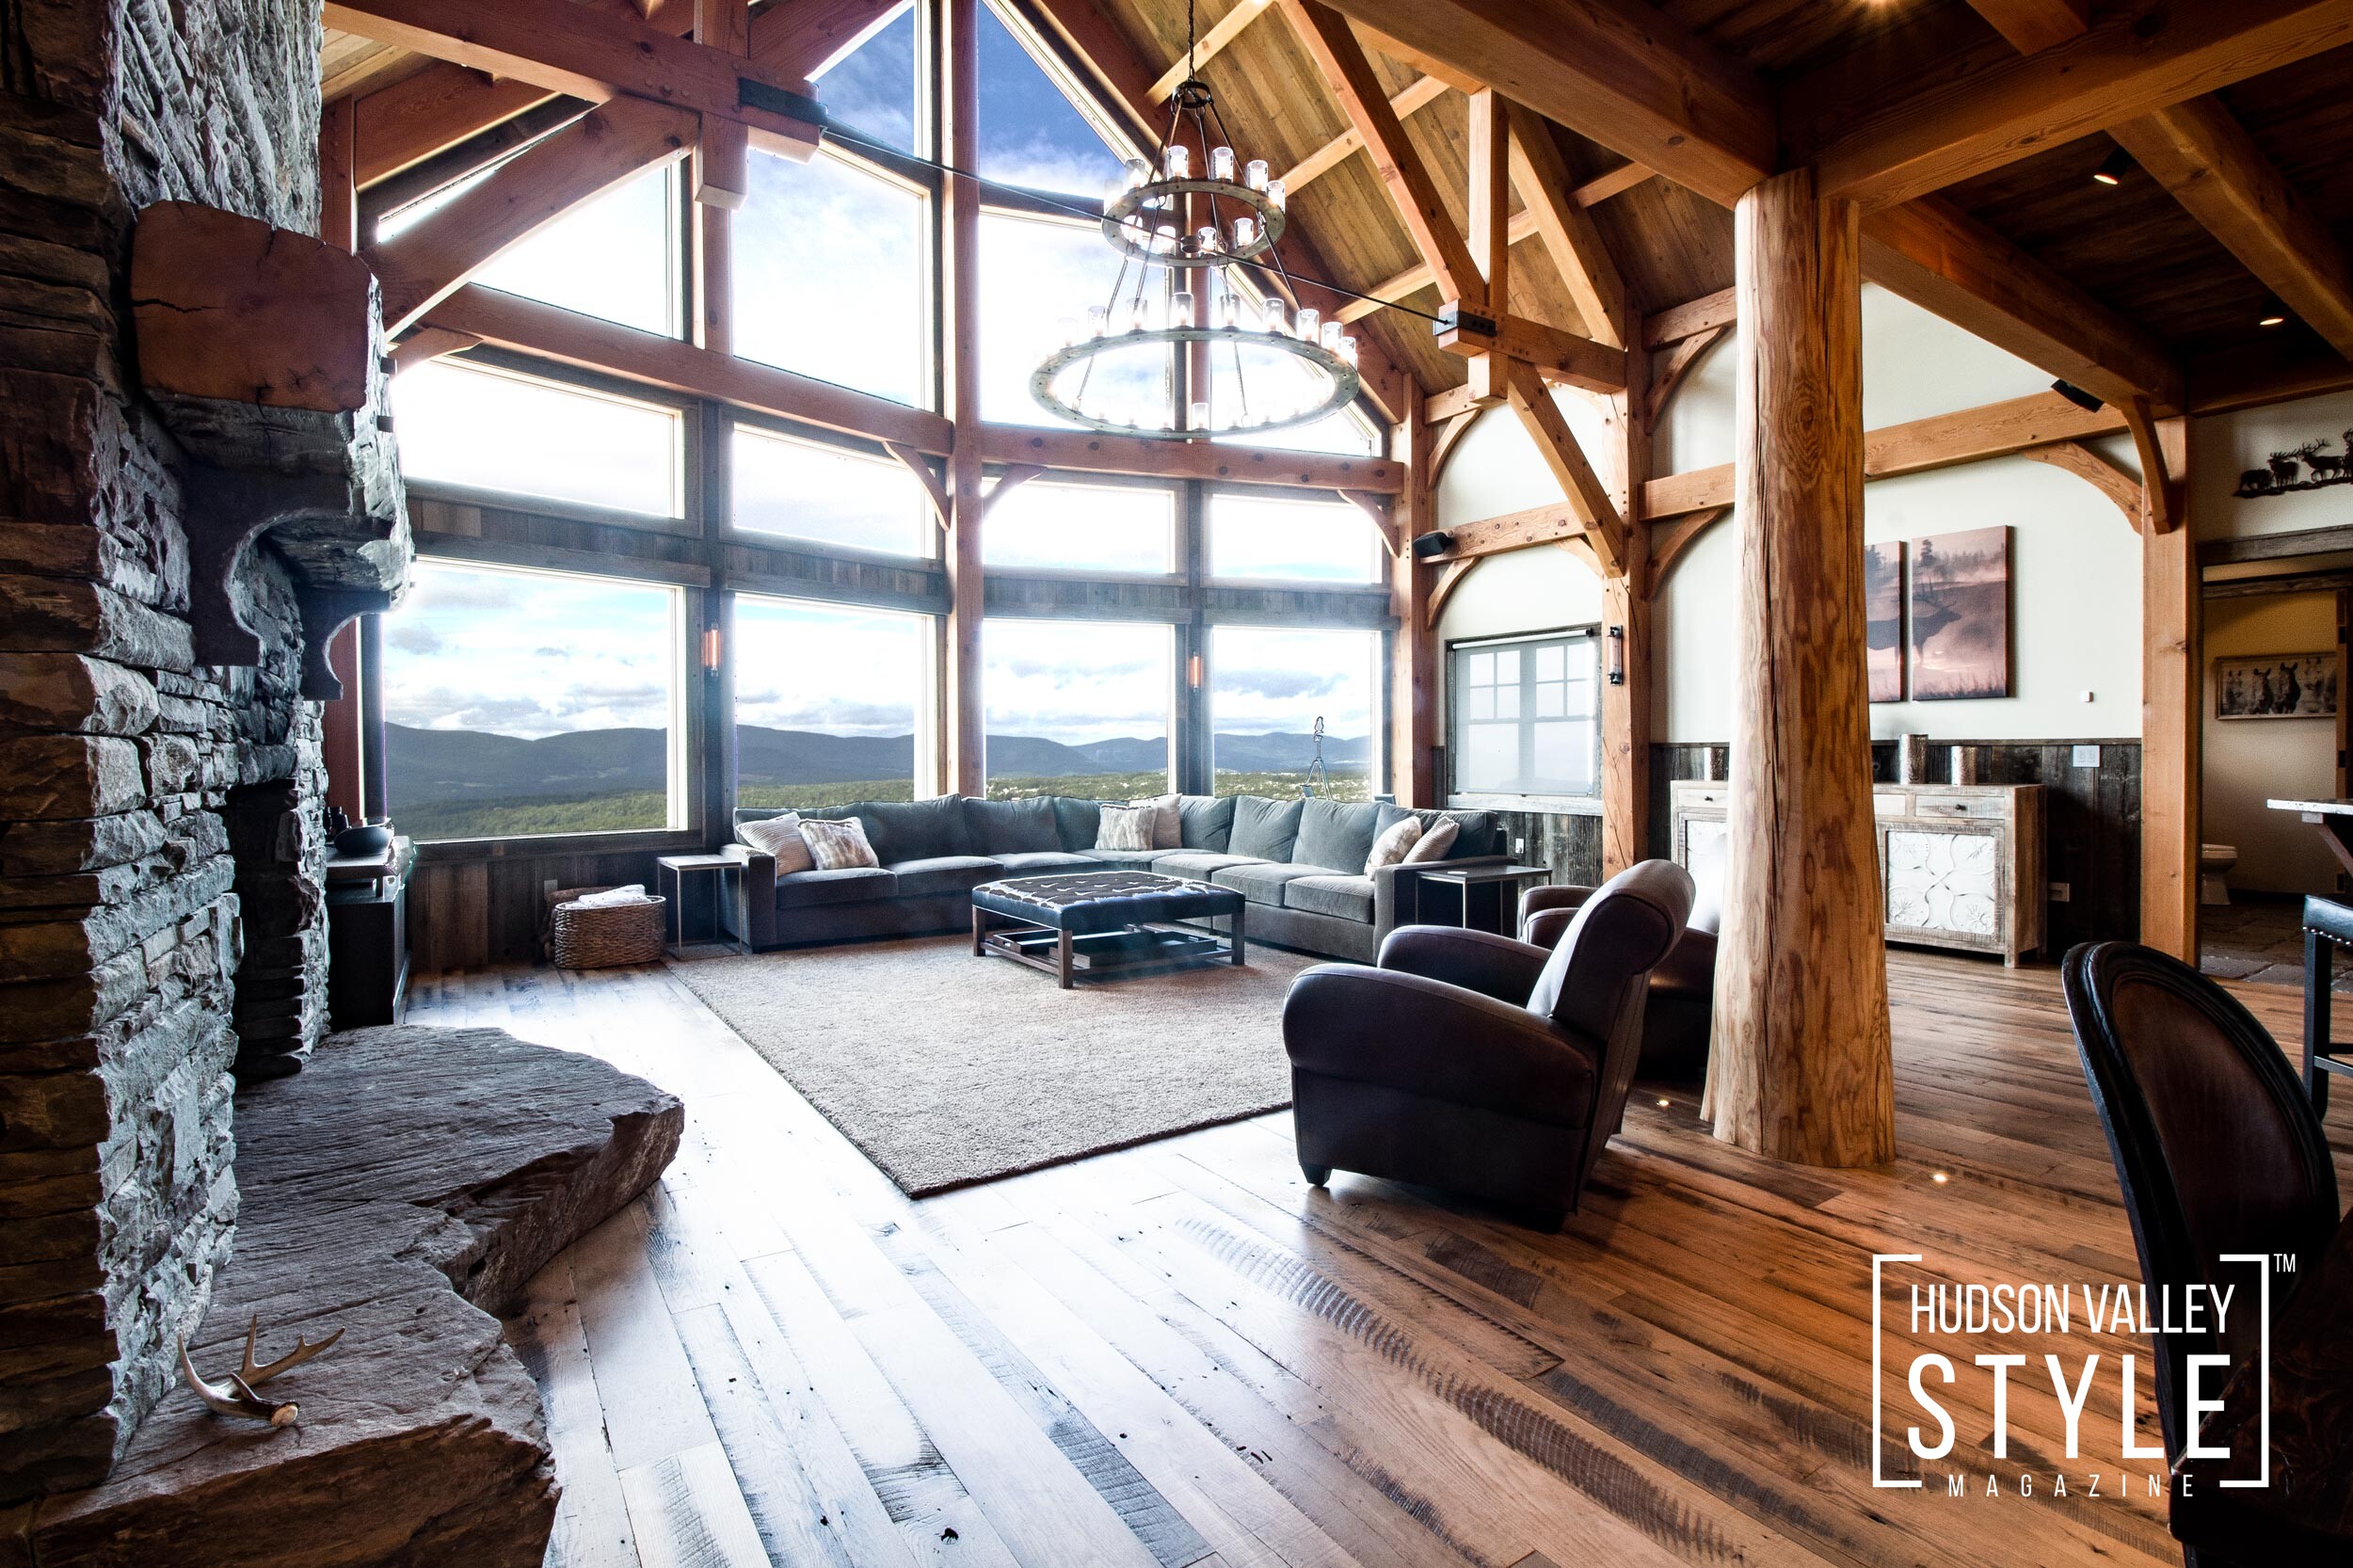 Choosing Decor for Your Hudson Valley Lodge or Cabin With a Rustic Theme by Designer Maxwell L. Alexander (Editor-in-Chief, Hudson Valley Style Magazine)